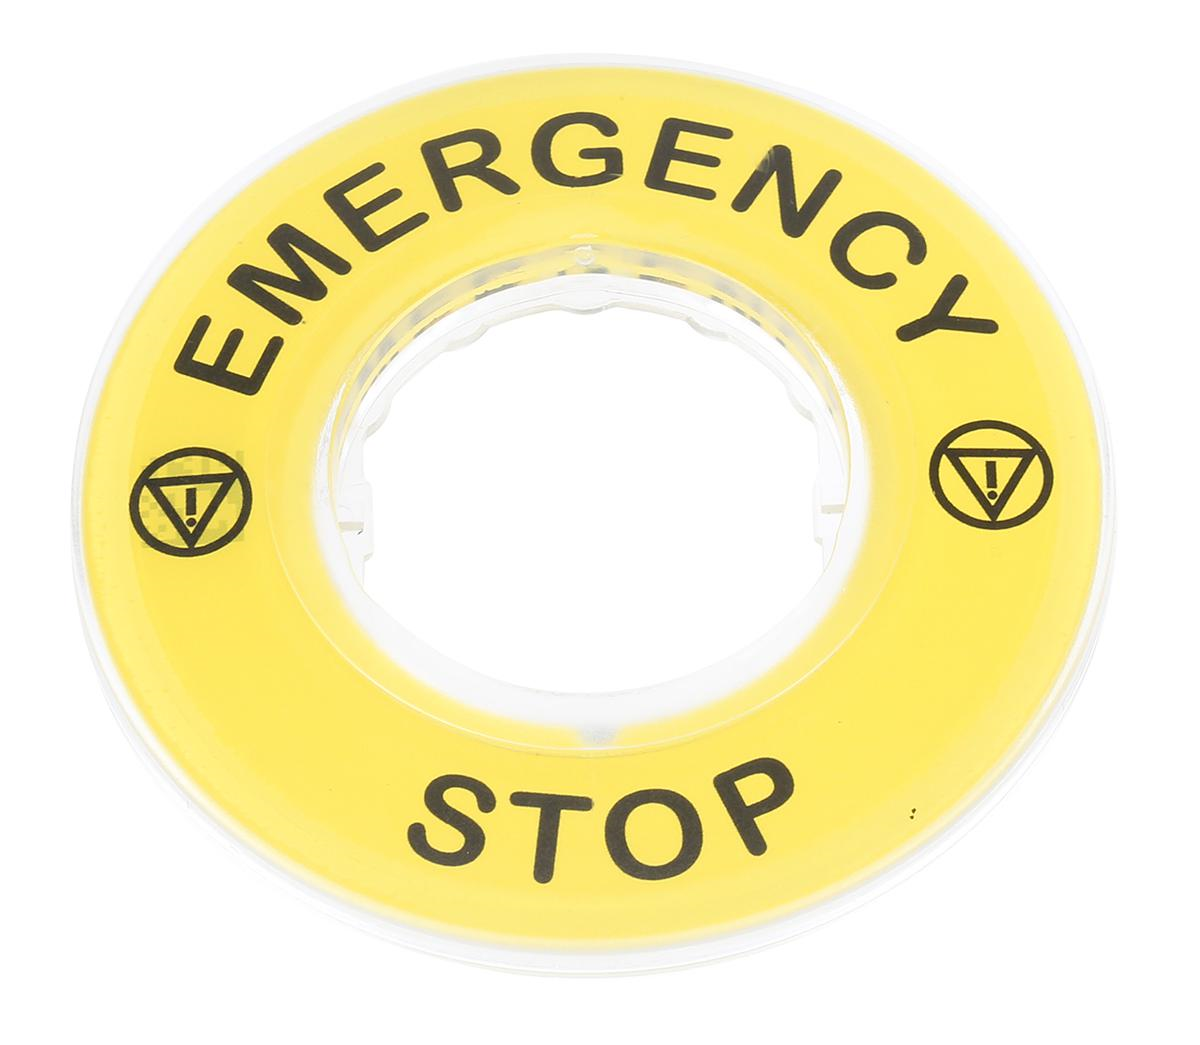 E. STOP LEGEND PLATE 60MM REPLACES ZBY9330